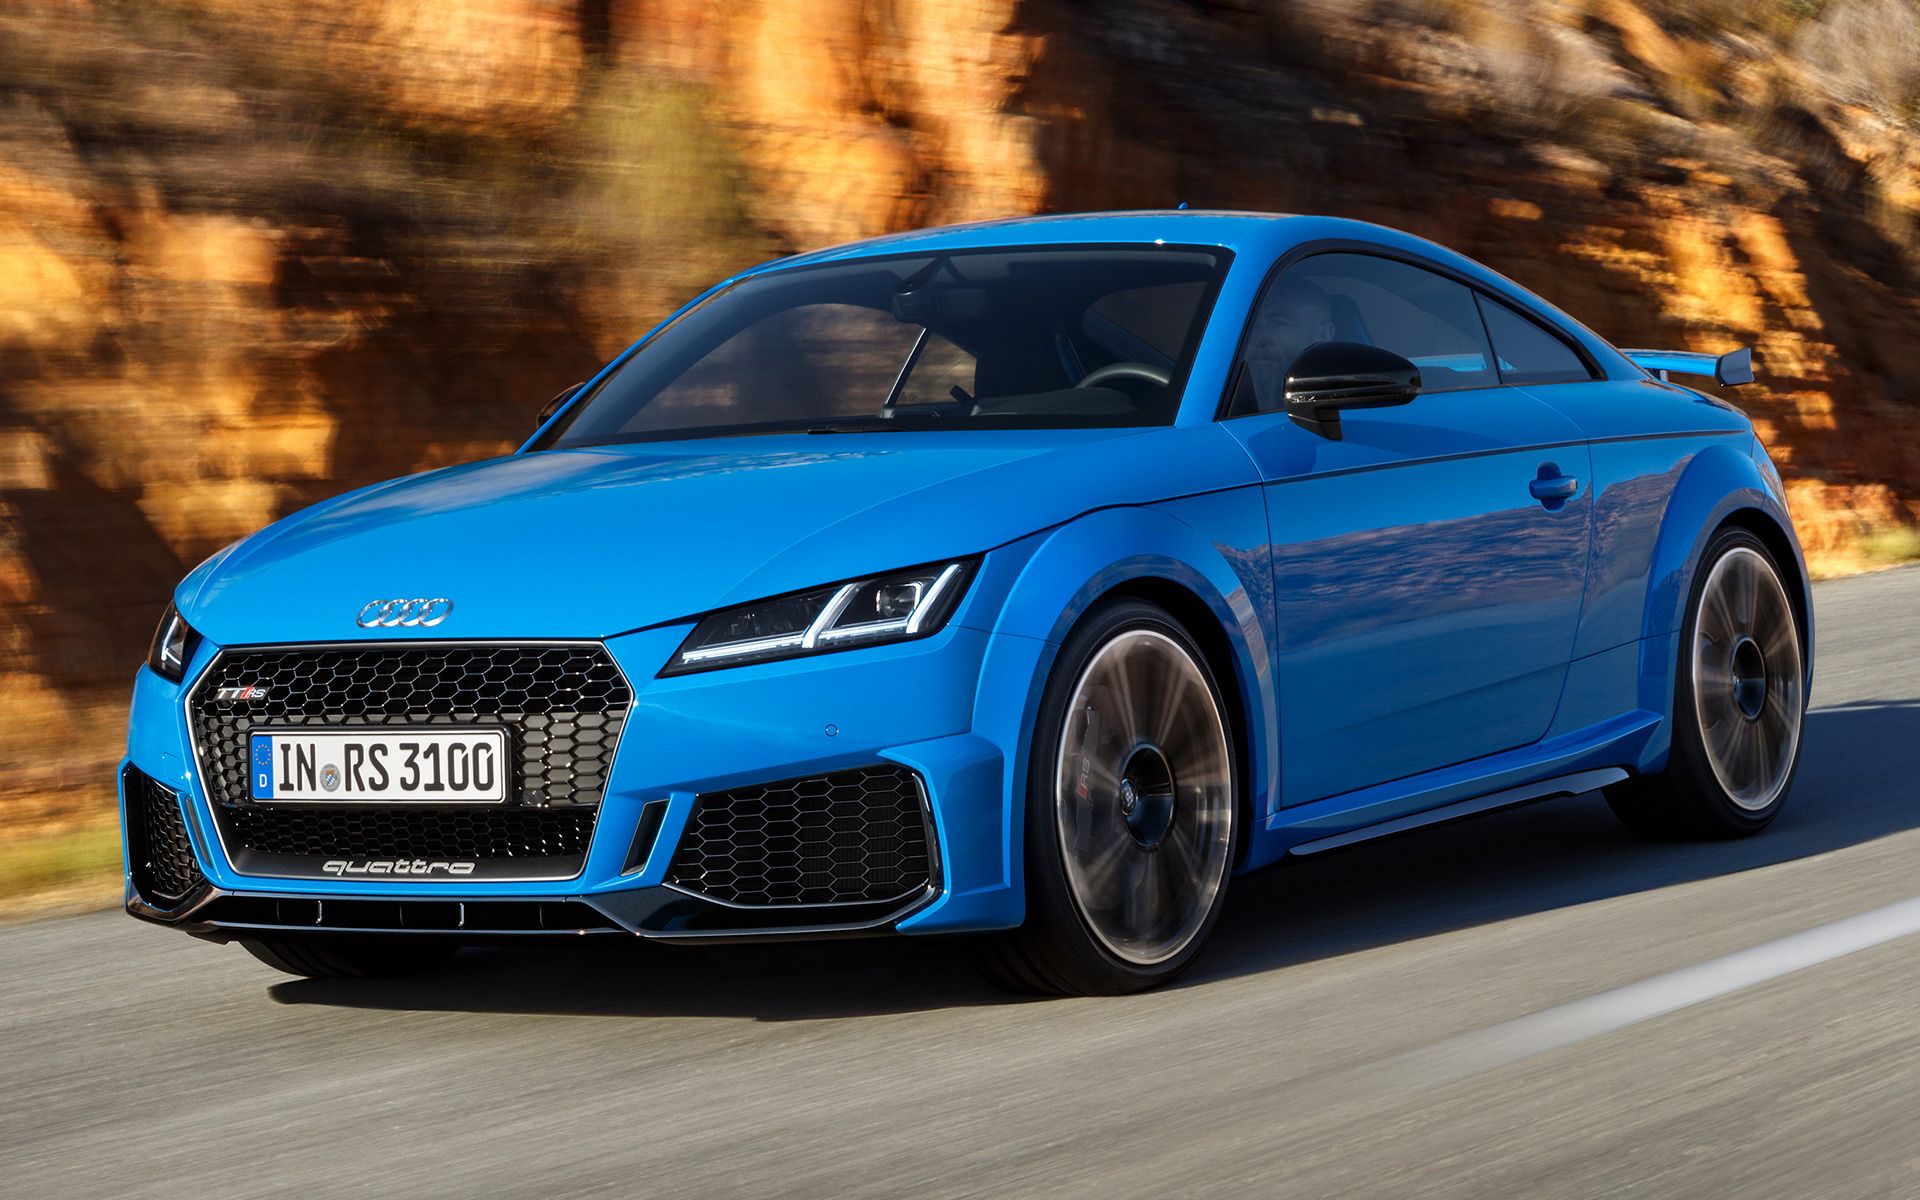 Audi TT RS Coupe and HD Image